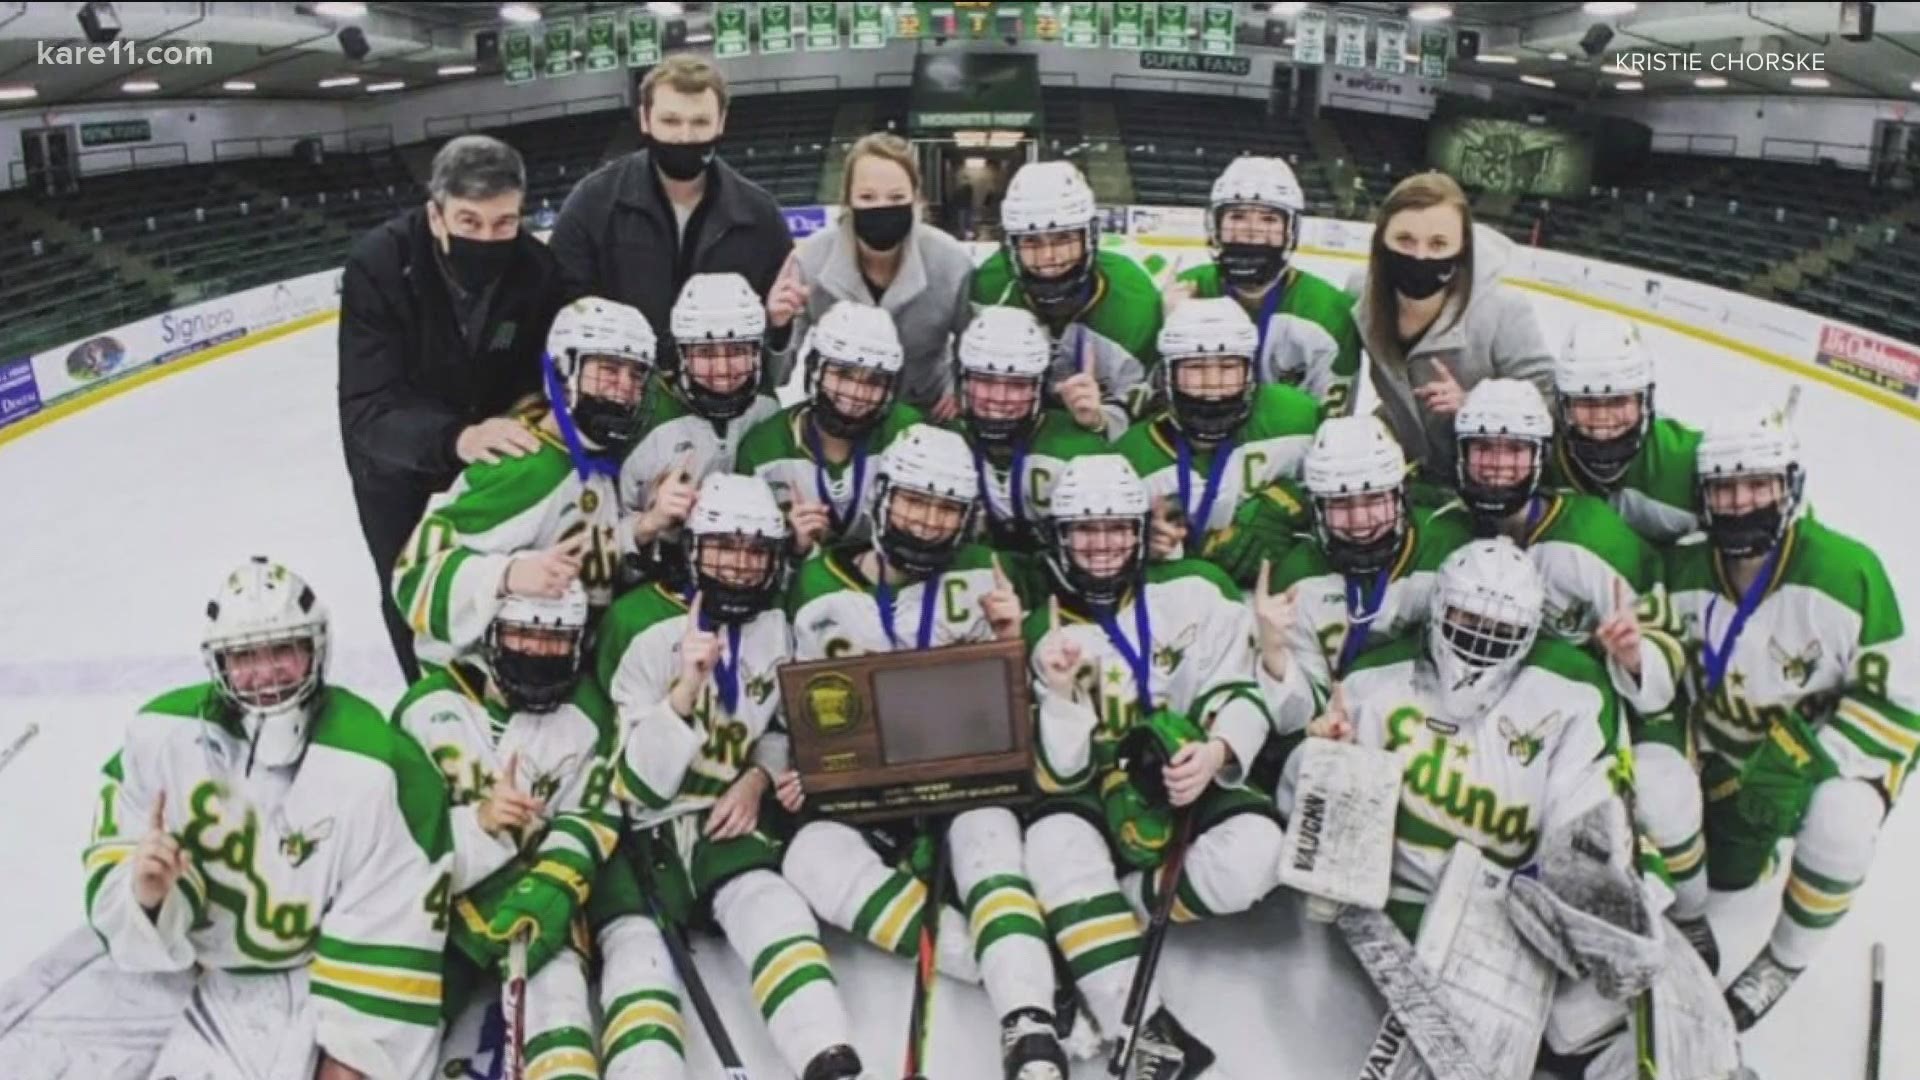 The Edina girls hockey team will have a 1st round bye after opponent was forced to forfeit the tournament